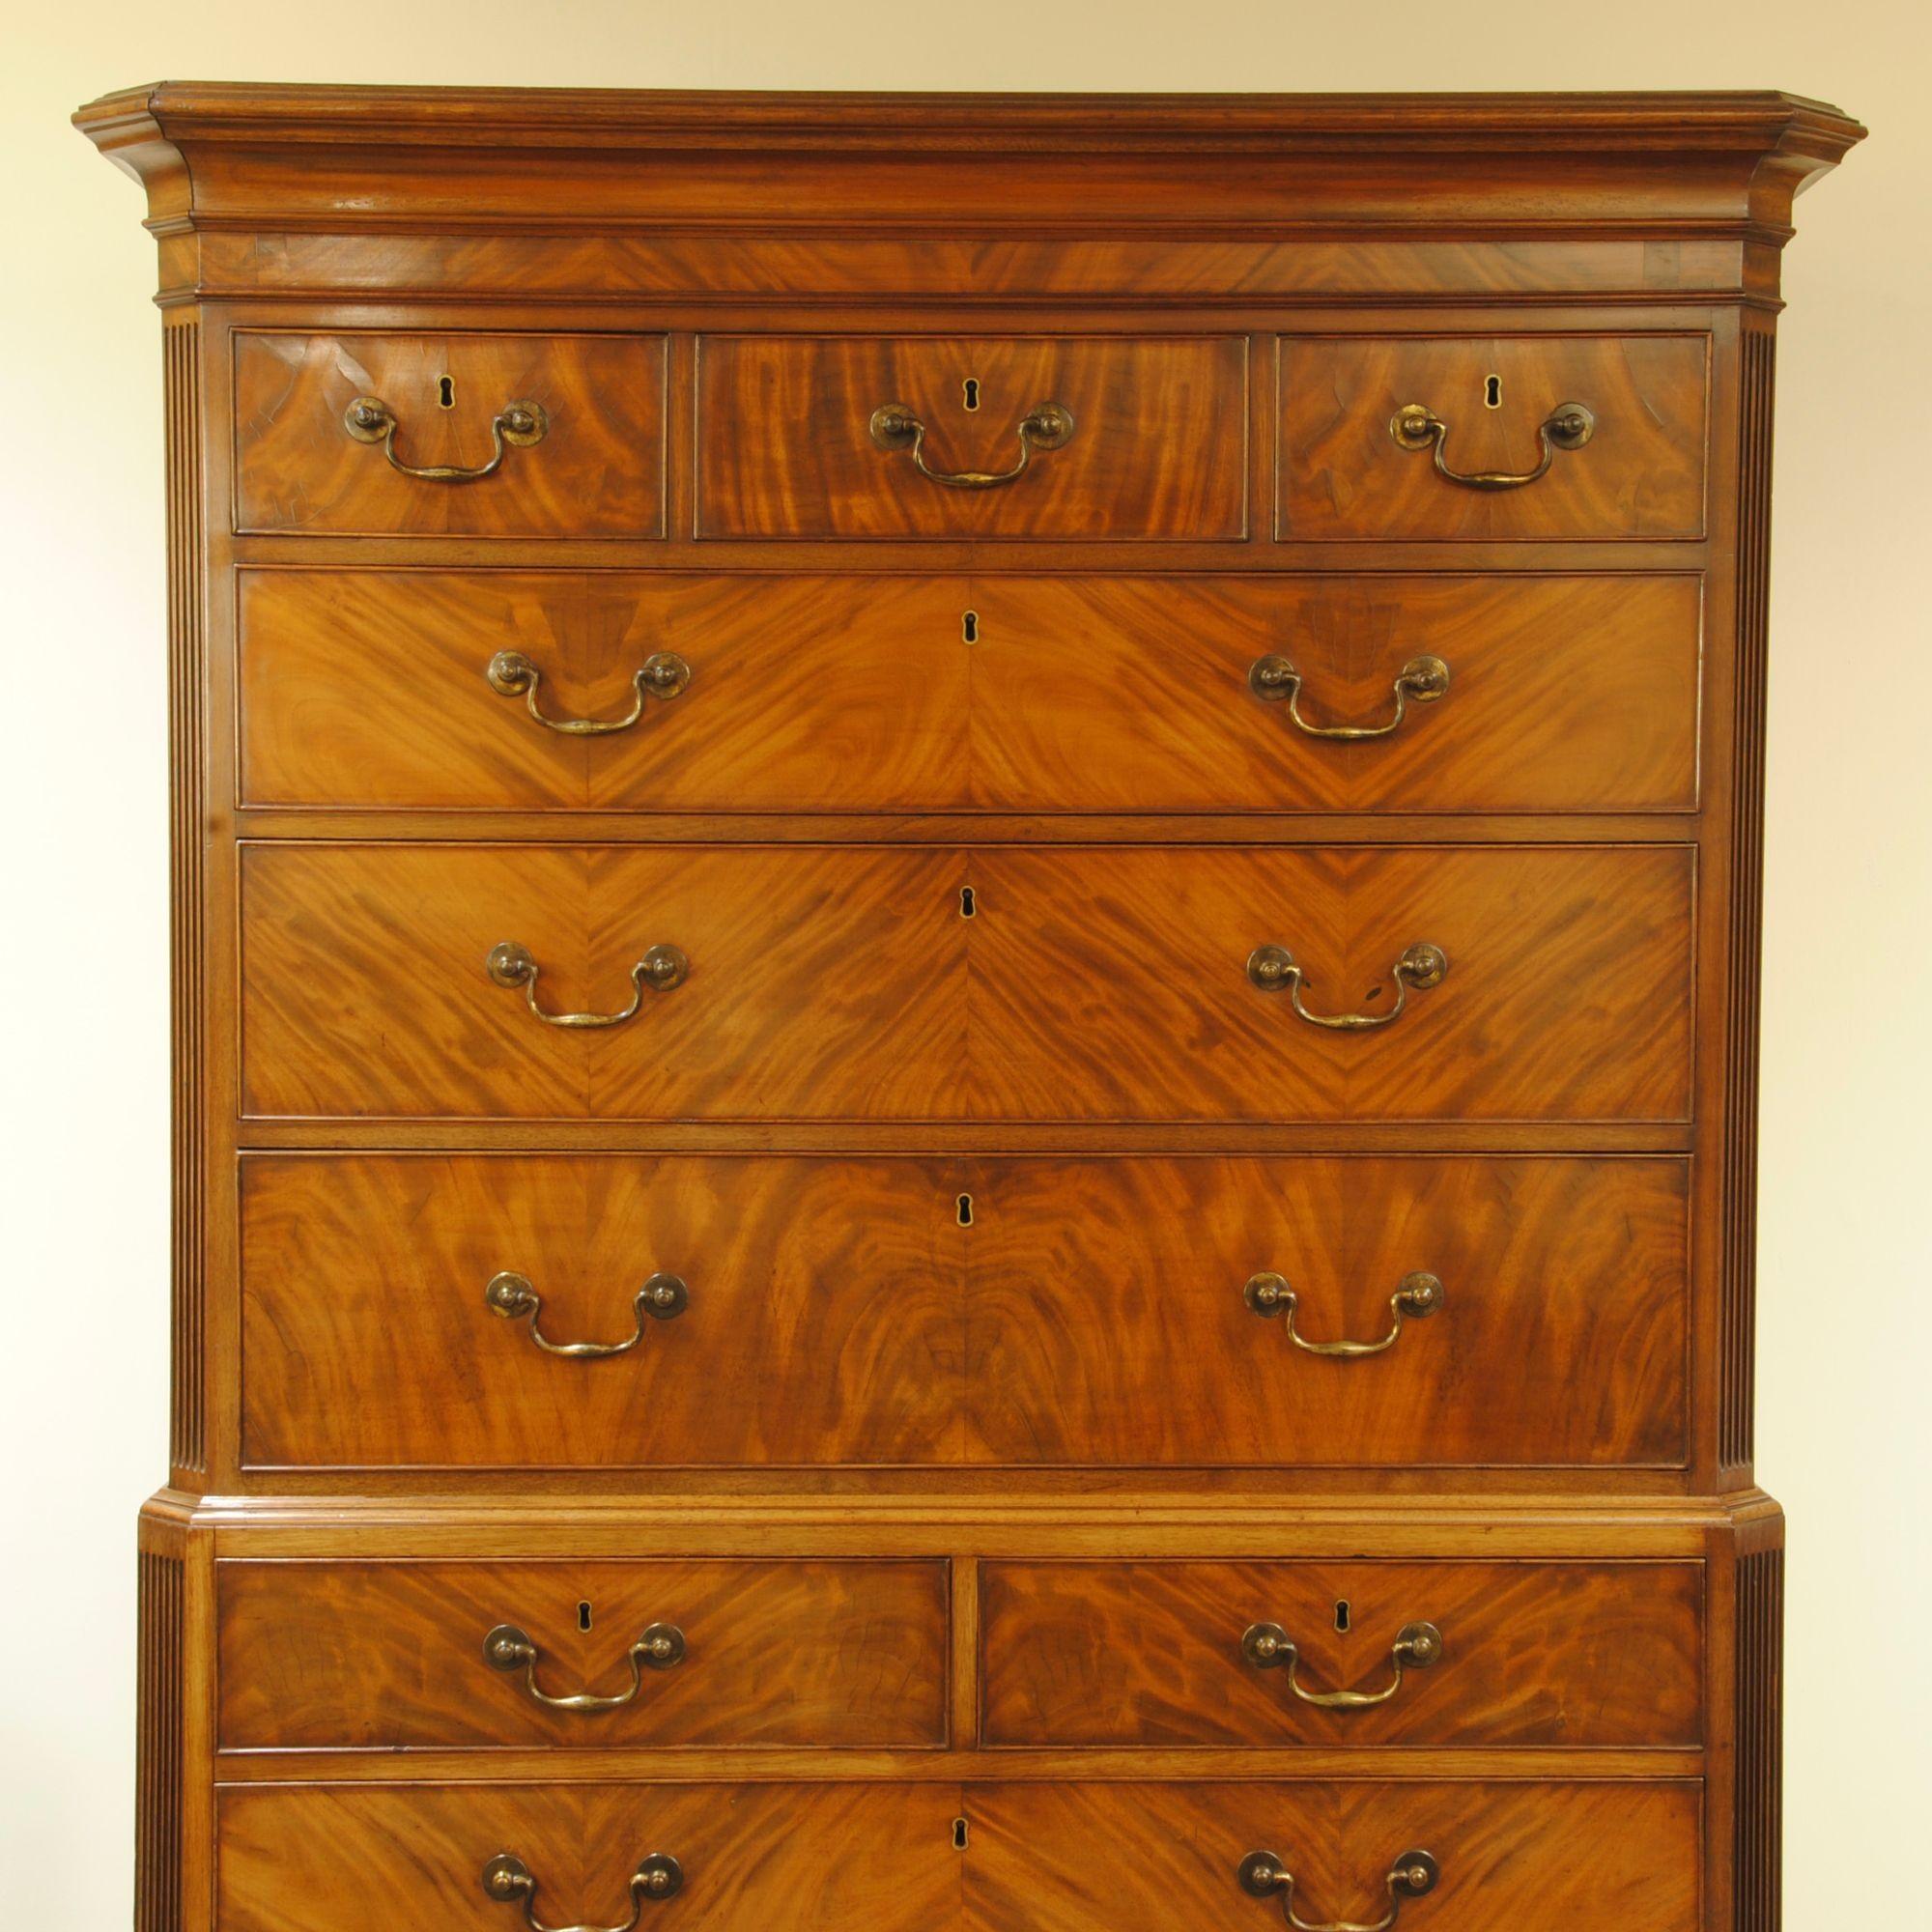 A fine 18th century flame mahogany tallboy, the quarter cut veneers are matched across the whole front creating a herringbone pattern. Double reeded canted corners, ogee bracket feet, and the original brass handles make this a superb example